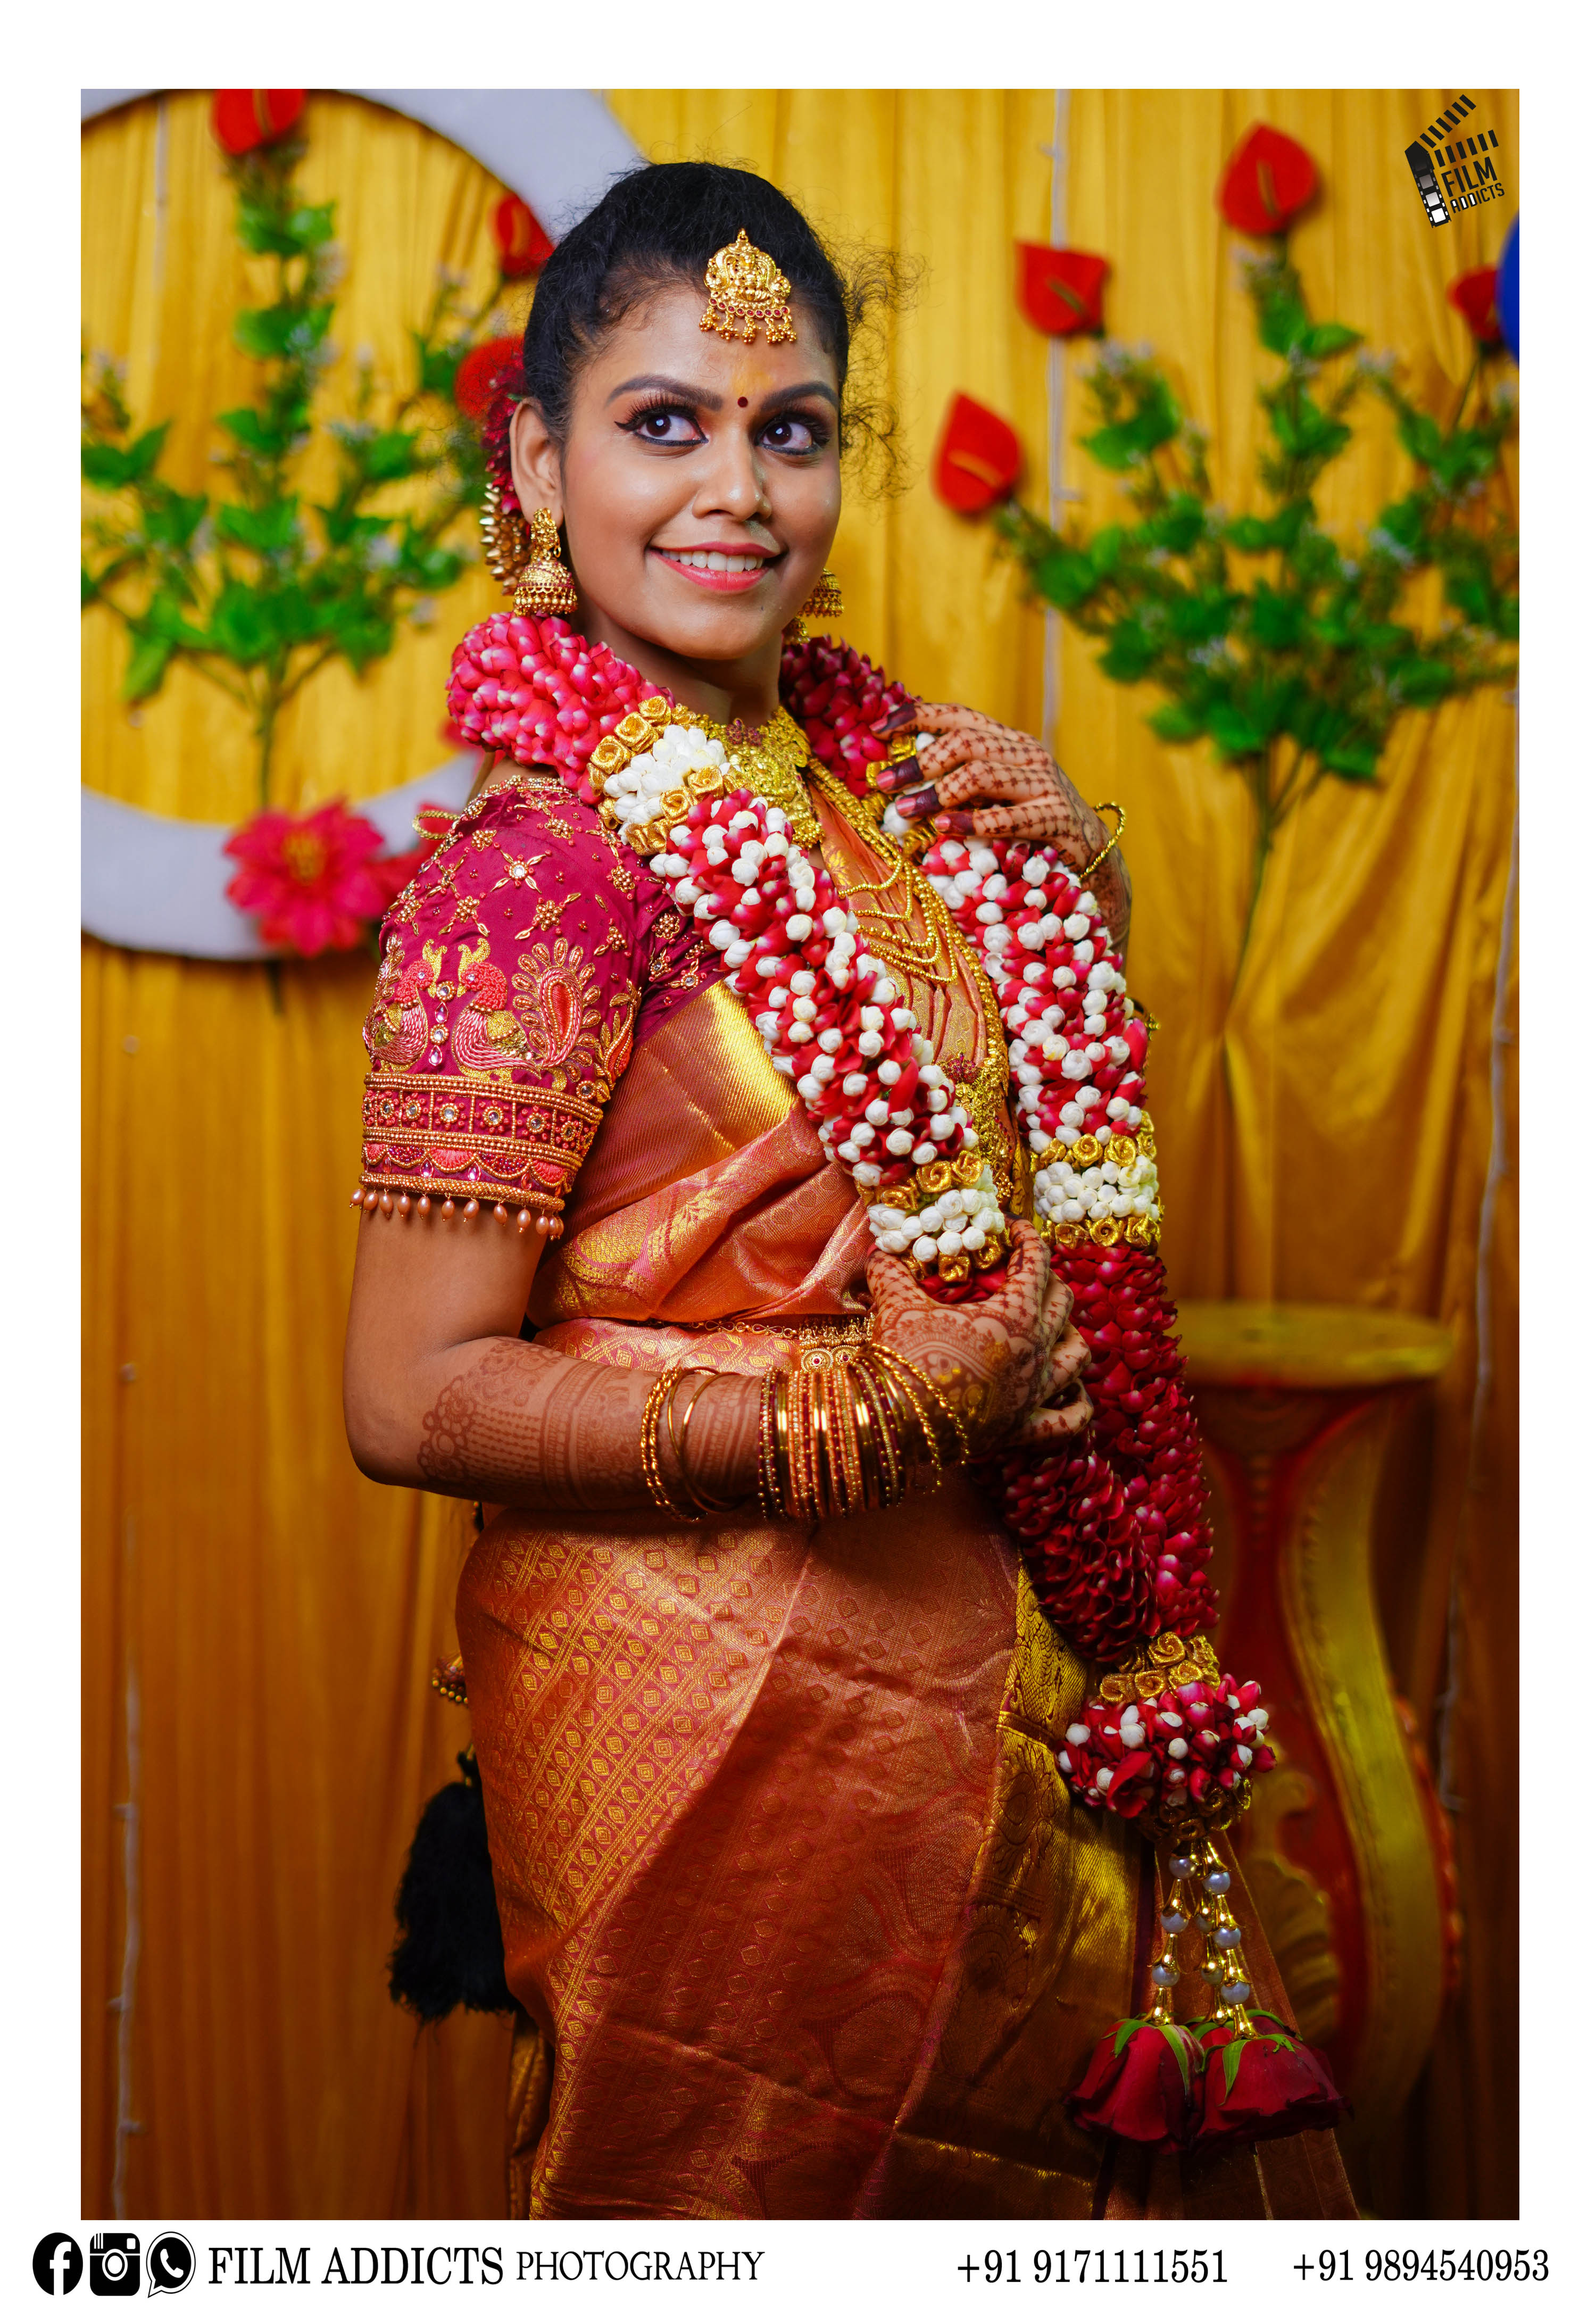 Best Puberty Photography in Karur-FilmAddicts Photography,Best wedding photographers in Karur,Best wedding photography in Karur,Best candid photographers in Karur,Best candid photography in Karur,Best marriage photographers in Karur,Best marriage photography in Karur,Best photographers in Karur,Best photography in Karur,Best wedding candid photography in Karur,Best wedding candid photographers in Karur,Best wedding video in Karur,Best wedding videographers in Karur,Best wedding videography in Karur,Best candid videographers in Karur,Best candid videography in Karur,Best marriage videographers in Karur,Best marriage videography in Karur,Best videographers in Karur,Best videography in Karur,Best wedding candid videography in Karur,Best wedding candid videographers in Karur,Best helicam operators in Karur,Best drone operators in Karur,Best wedding studio in Karur,Best professional photographers in Karur,Best professional photography in Karur,No.1 wedding photographers in Karur,No.1 wedding photography in Karur,Karur wedding photographers,Karur wedding photography,Karur wedding videos,Best candid videos in Karur,Best candid photos in Karur,Best helicam operators photography in Karur,Best helicam operator photographers in Karur,Best outdoor videography in Karur,Best professional wedding photography in Karur,Best outdoor photography in Karur,Best outdoor photographers in Karur,Best drone operators photographers in Karur,Best wedding candid videography in Karur,tamilnadu wedding photography, tamilnadu.